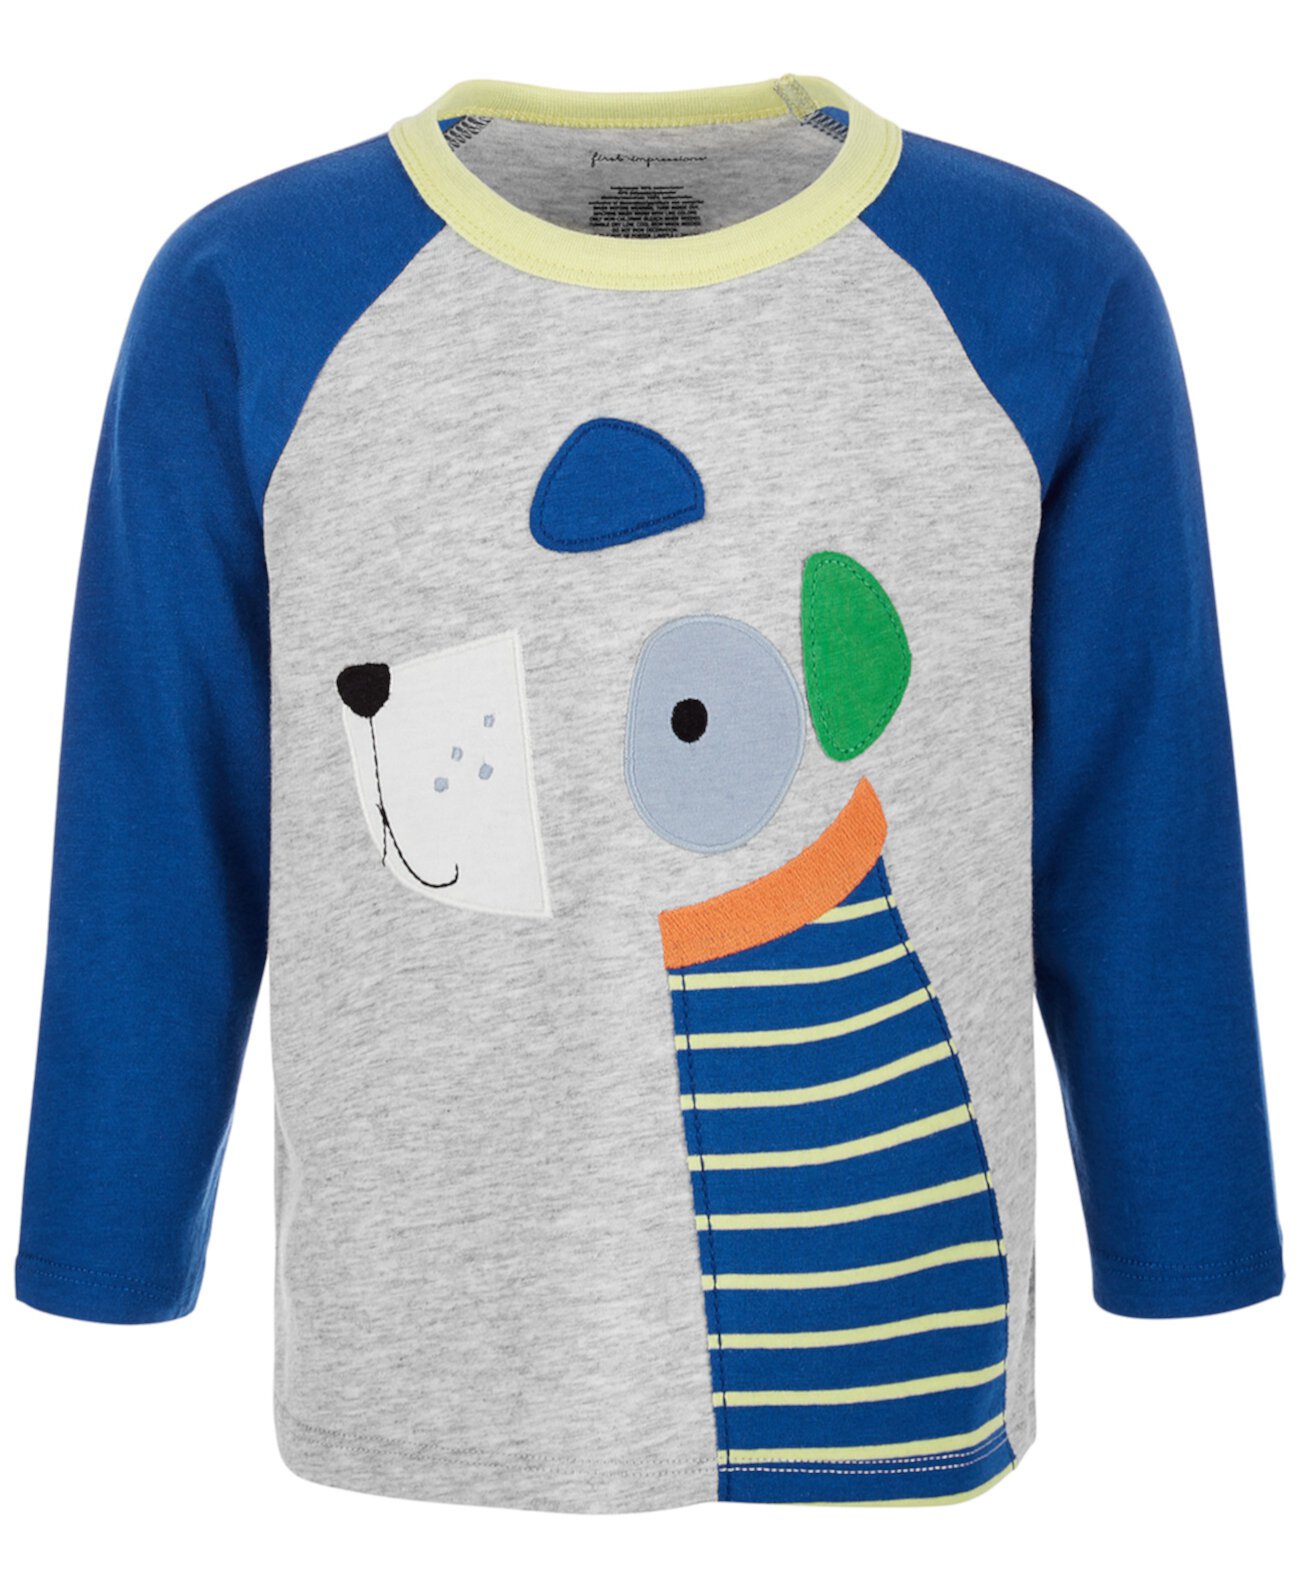 Baby Boys Puppy T-Shirt, Created for Macy's First Impressions